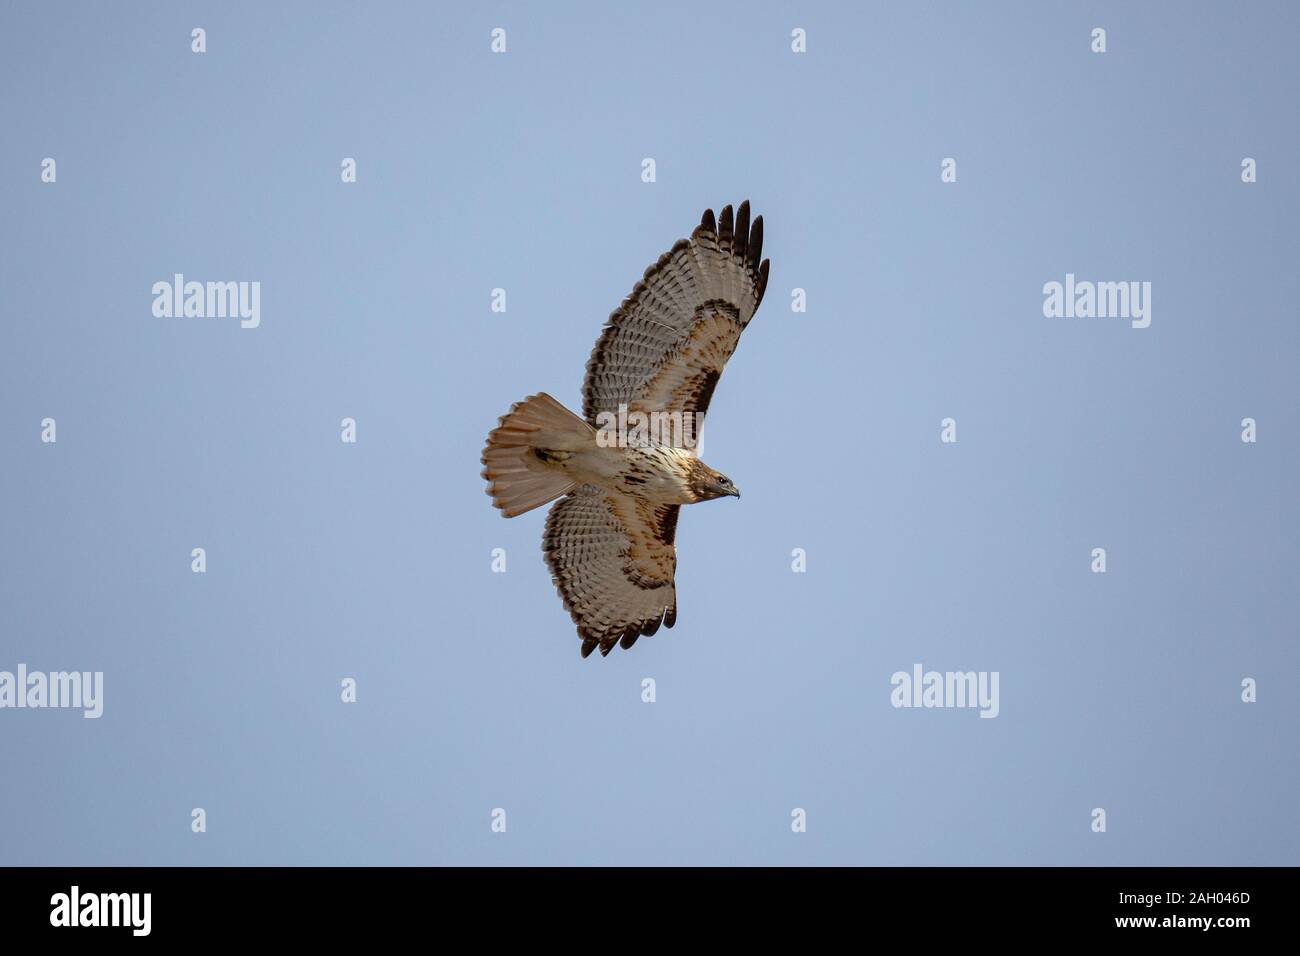 Flying adult Red-Tailed Hawk (Buteo jamaicensis) Colorado, USA 2019 Stock Photo